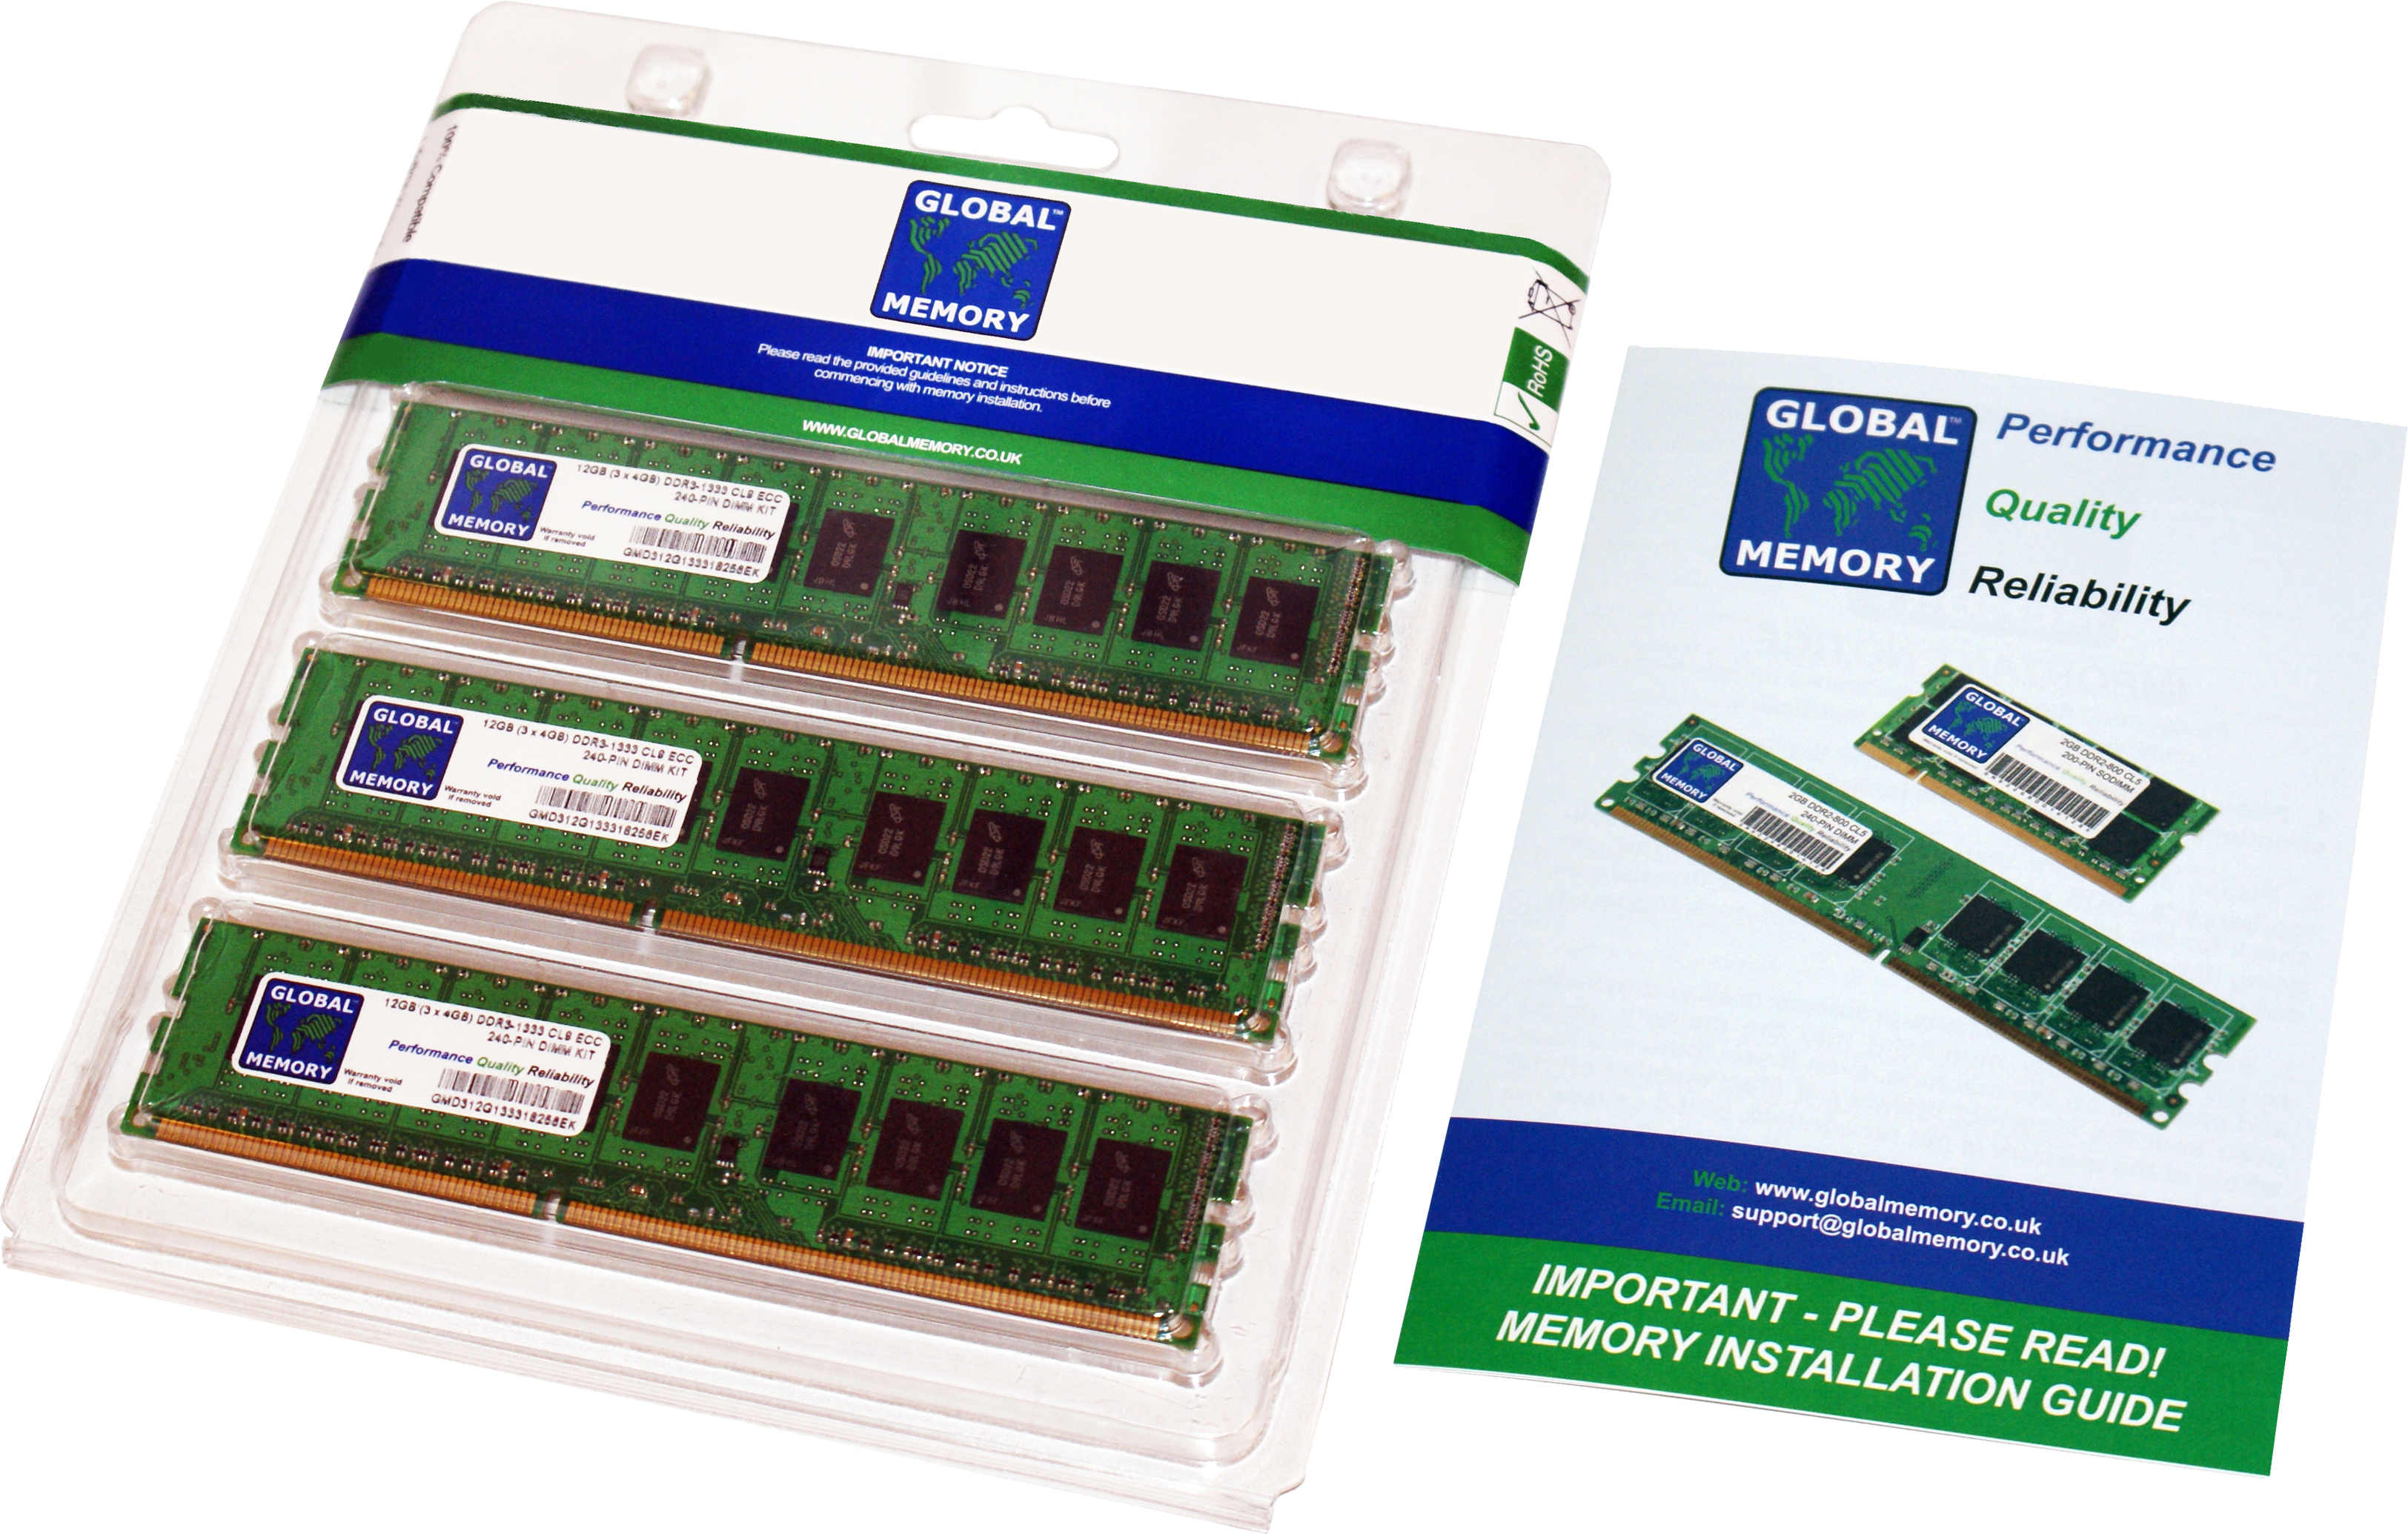 24GB (3 x 8GB) DDR3 1866MHz PC3-14900 240-PIN ECC DIMM (UDIMM) MEMORY RAM KIT FOR ACER SERVERS/WORKSTATIONS